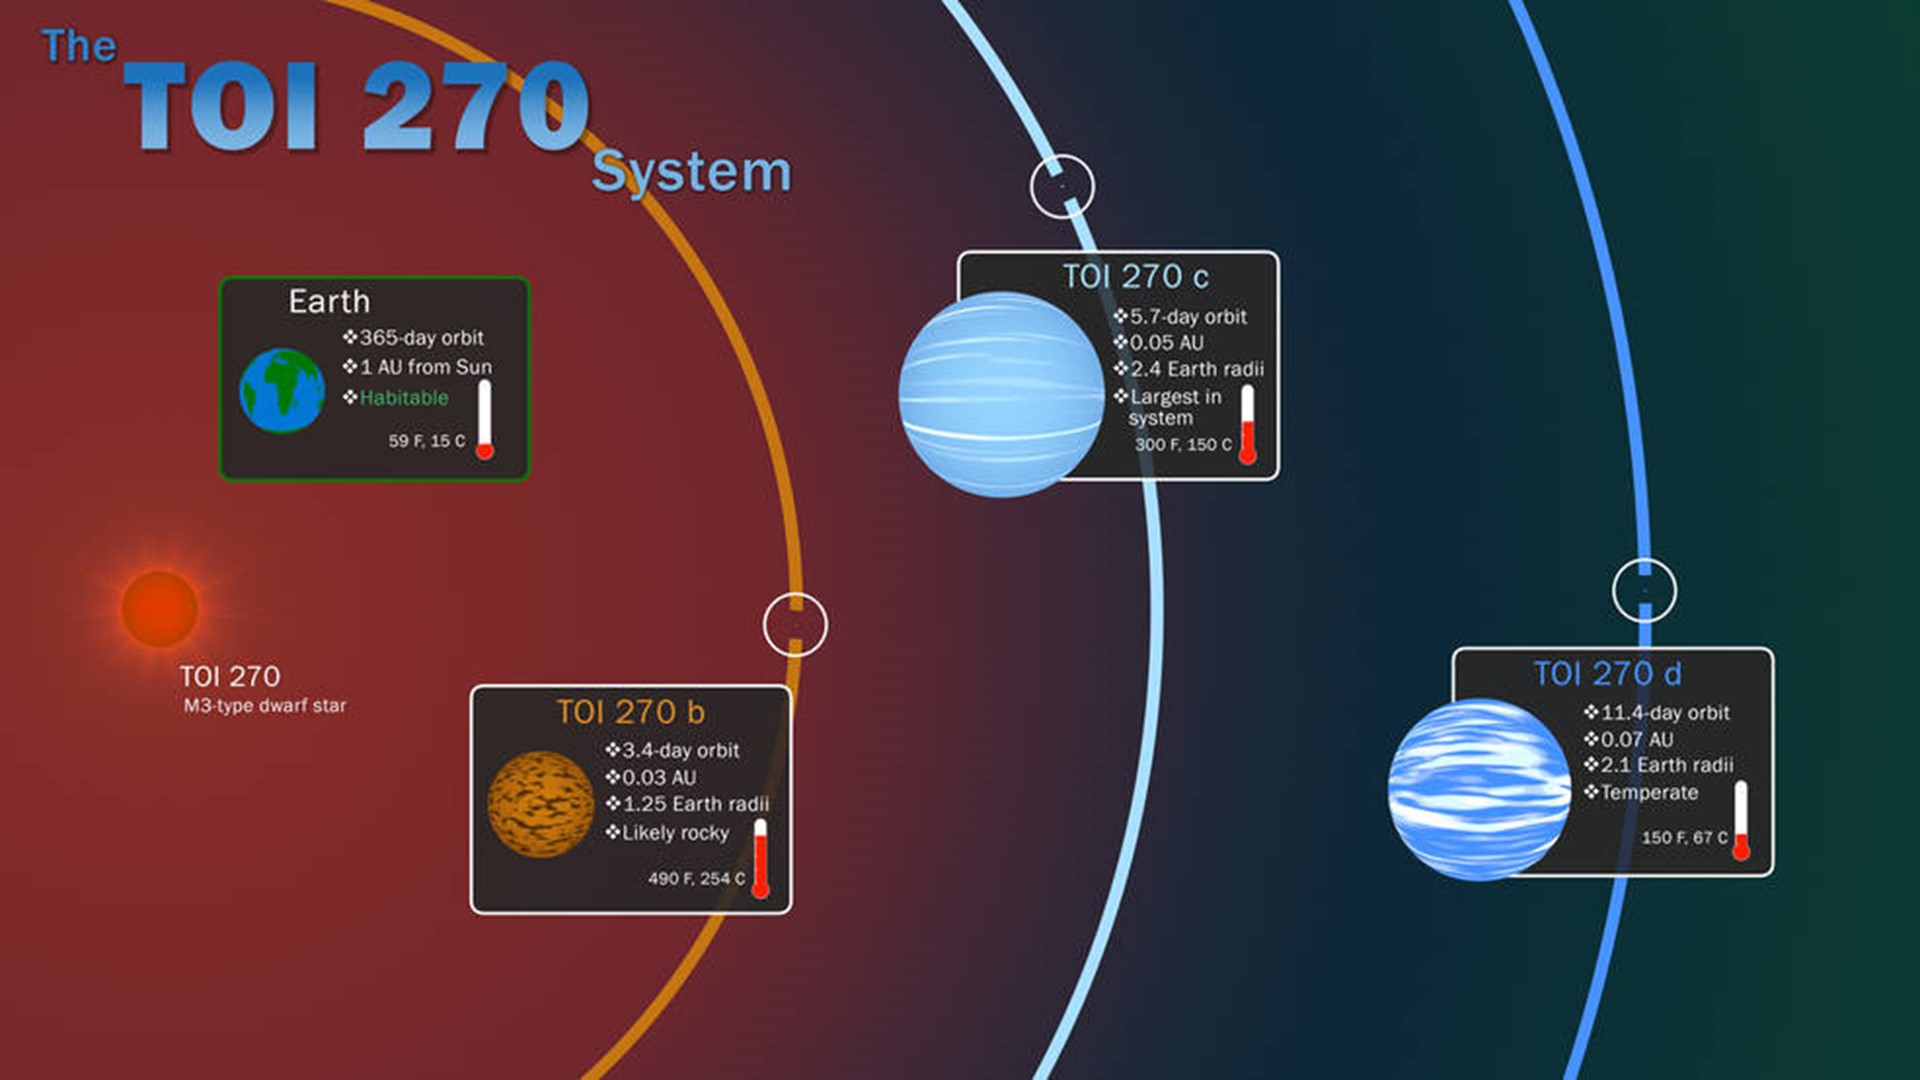 TESS (Transiting Exoplanet Survey Satellite) identified three new planets outside our solar system. These planets orbit a star smaller and cooler than our Sun. The star was dubbed TOI 270.